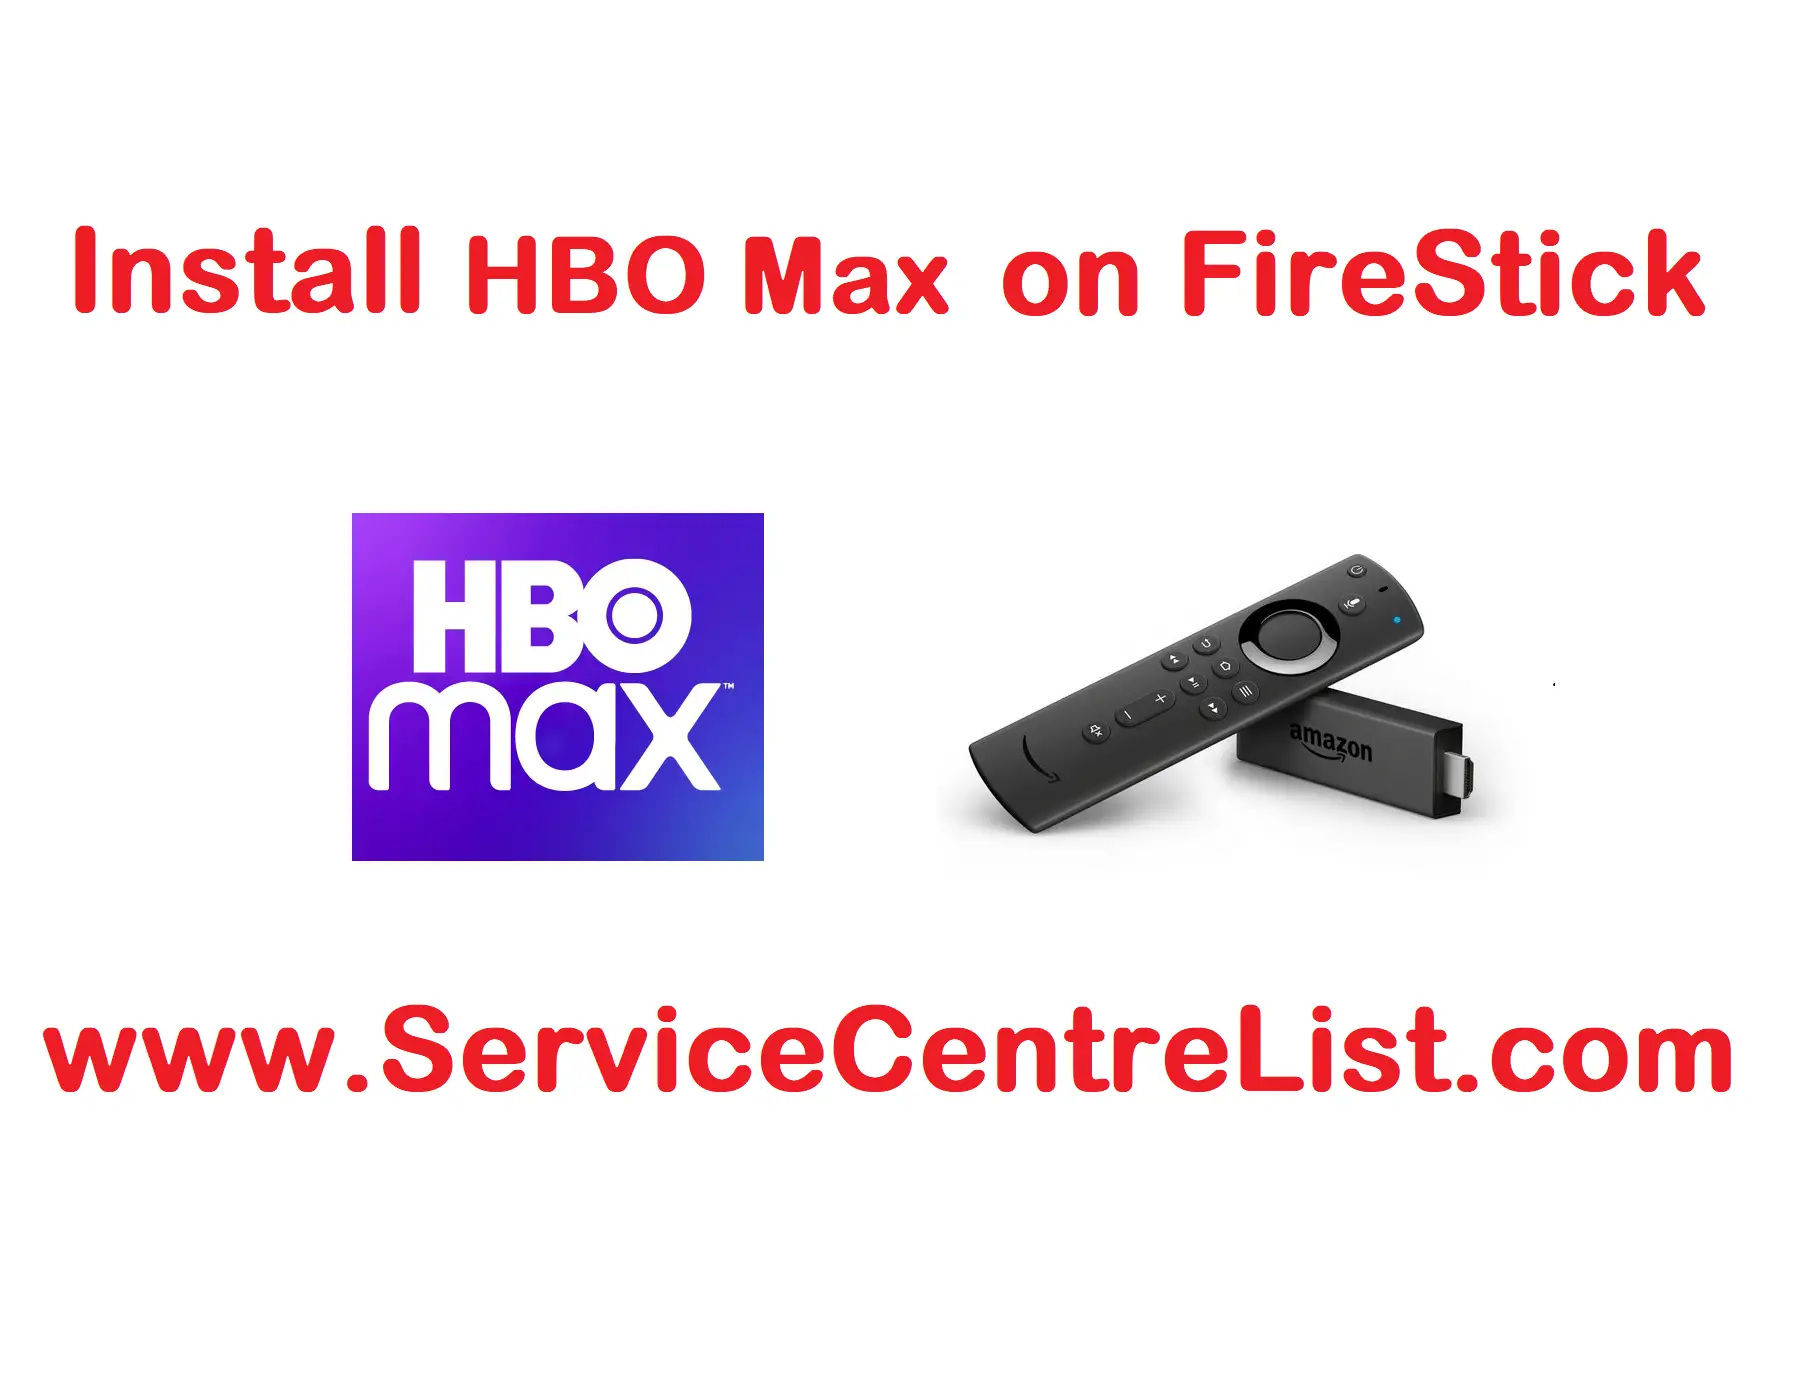 install HBO Max on firestick